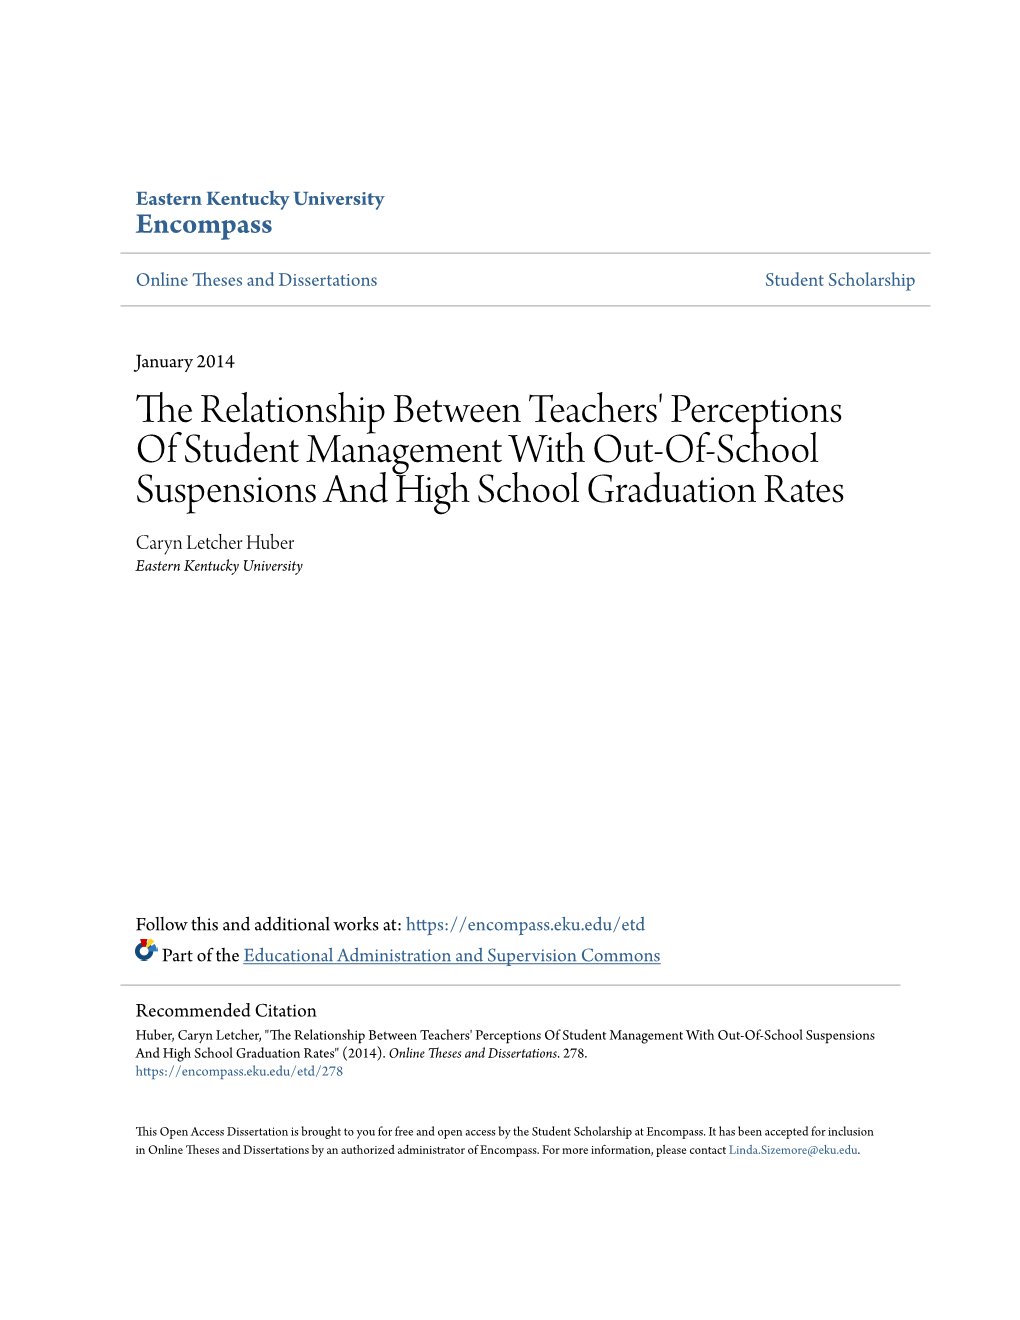 The Relationship Between Teachers' Perceptions of Student Management with Out-Of-School Suspensions and High School Graduati